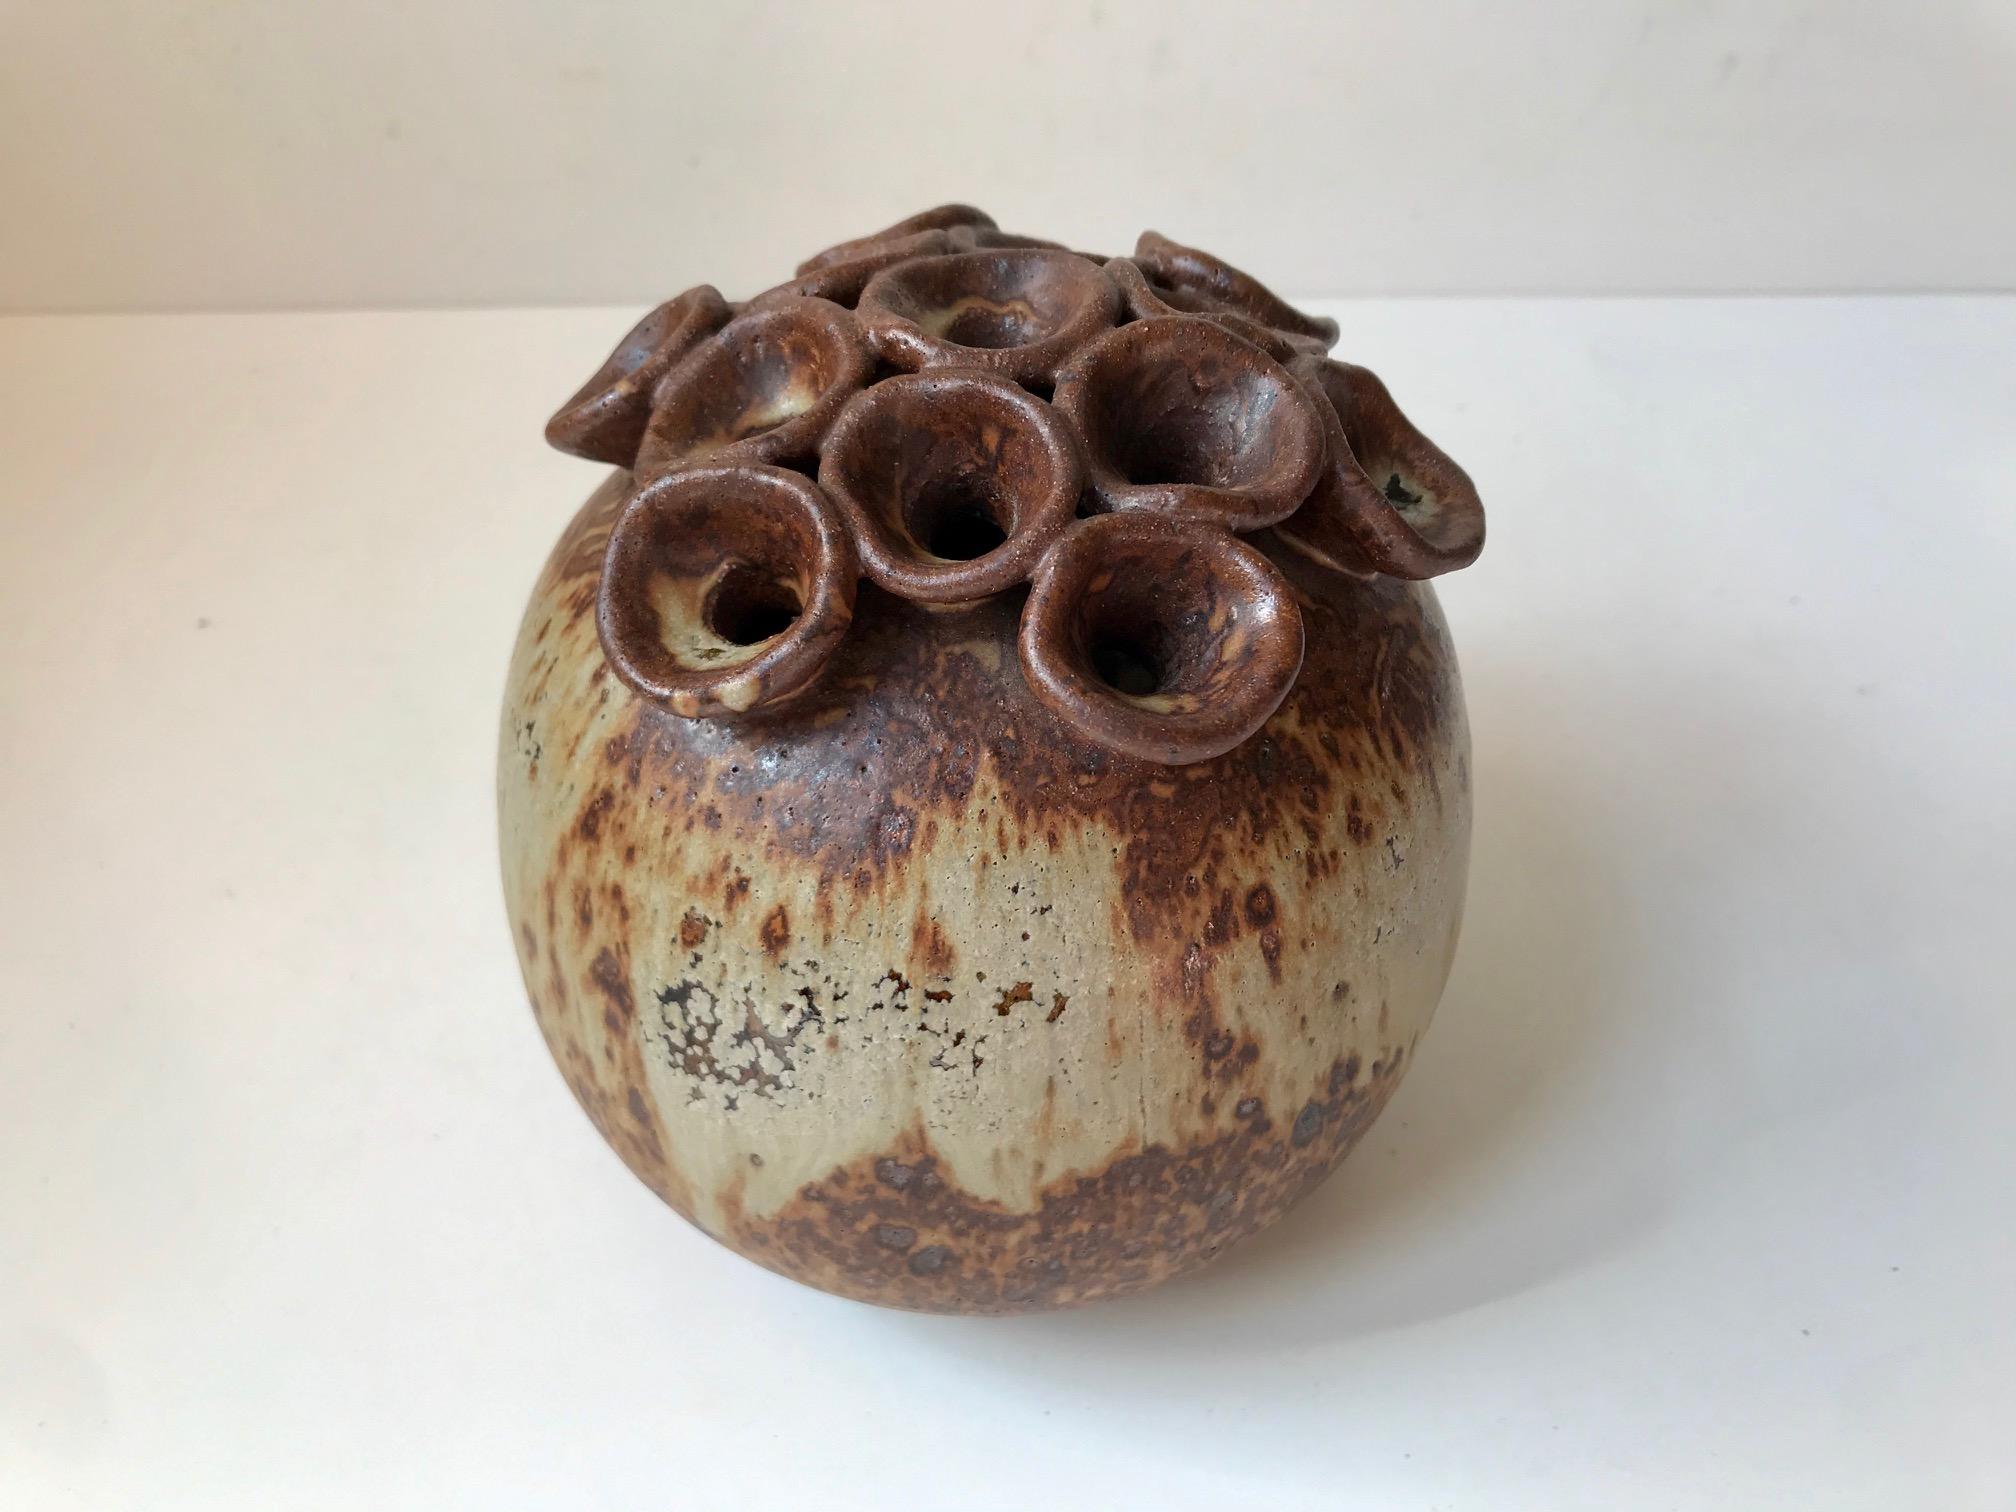 This Danish stoneware vase comes in a biomorphic shape with applied tentacles and earthy glazes. It was designed by ceramist Dorthe Visby at her workshop in Tjaereborg, Denmark during the 1990s. A hole is located just below the tentacles which